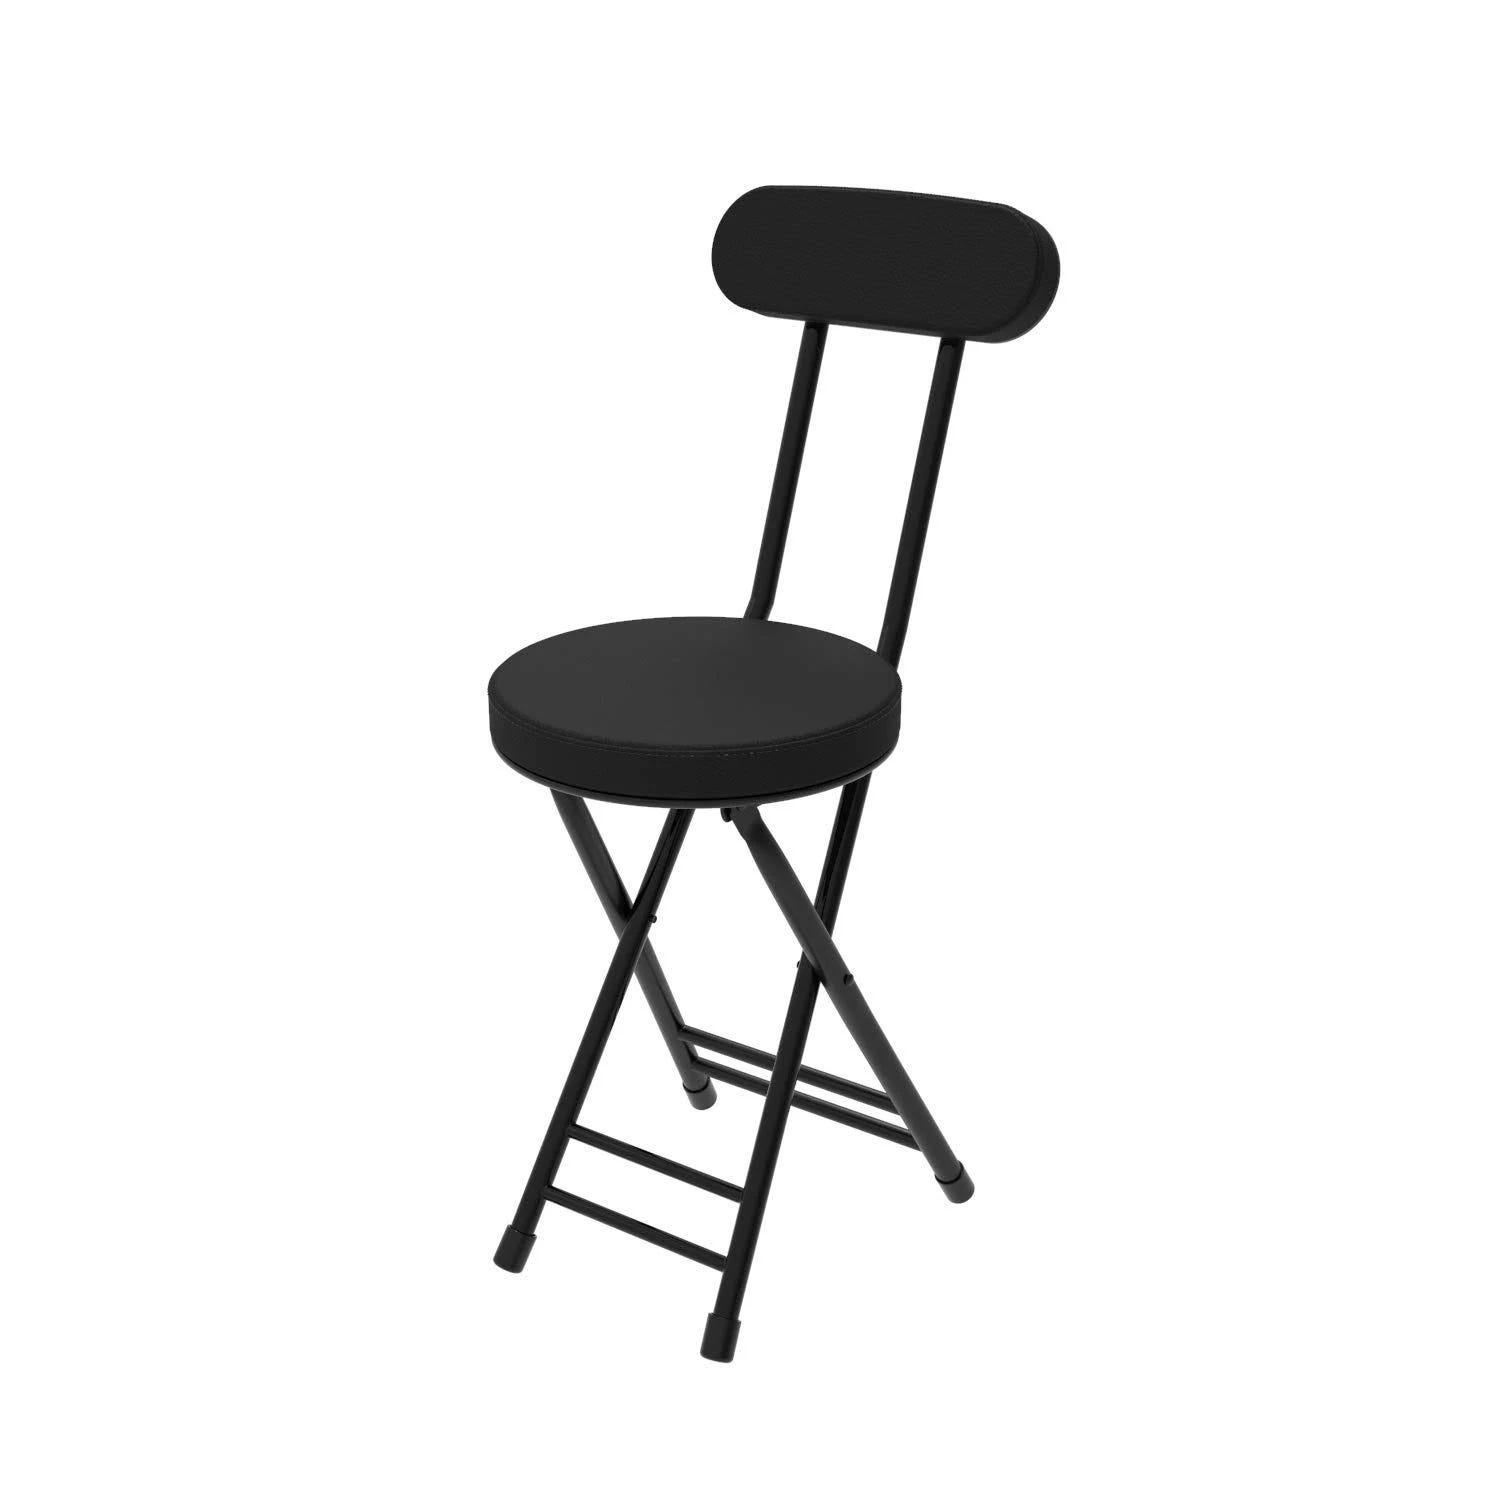 Heavy-Duty, Folding Round Stool with Padded Seat and Portable Design | Image